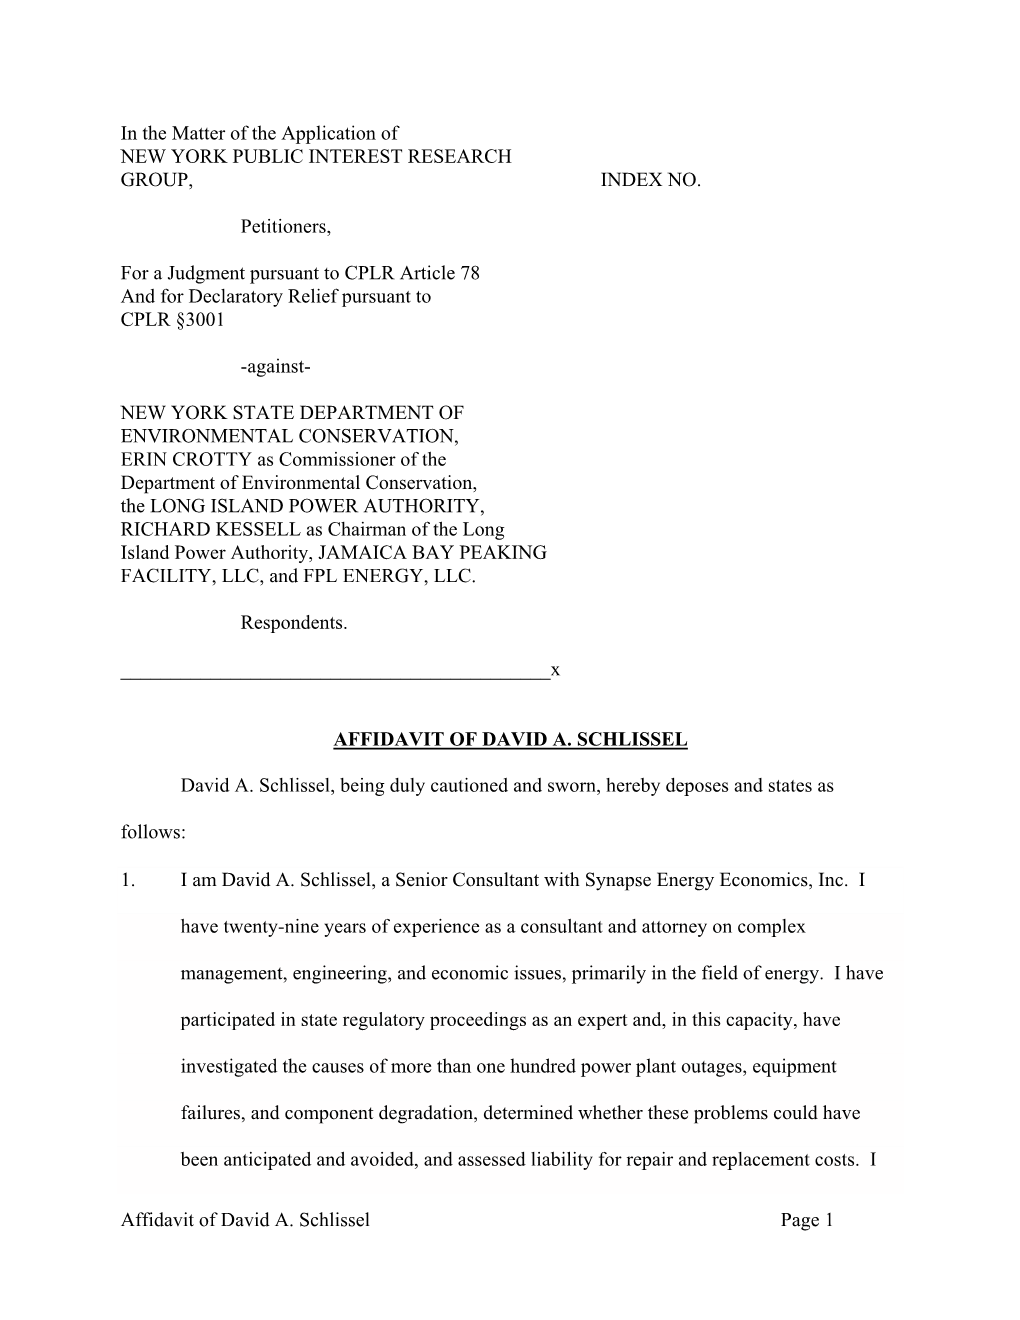 Affidavit of David A. Schlissel Page 1 in the Matter of the Application of NEW YORK PUBLIC INTEREST RESEARCH GROUP, INDEX NO. Pe